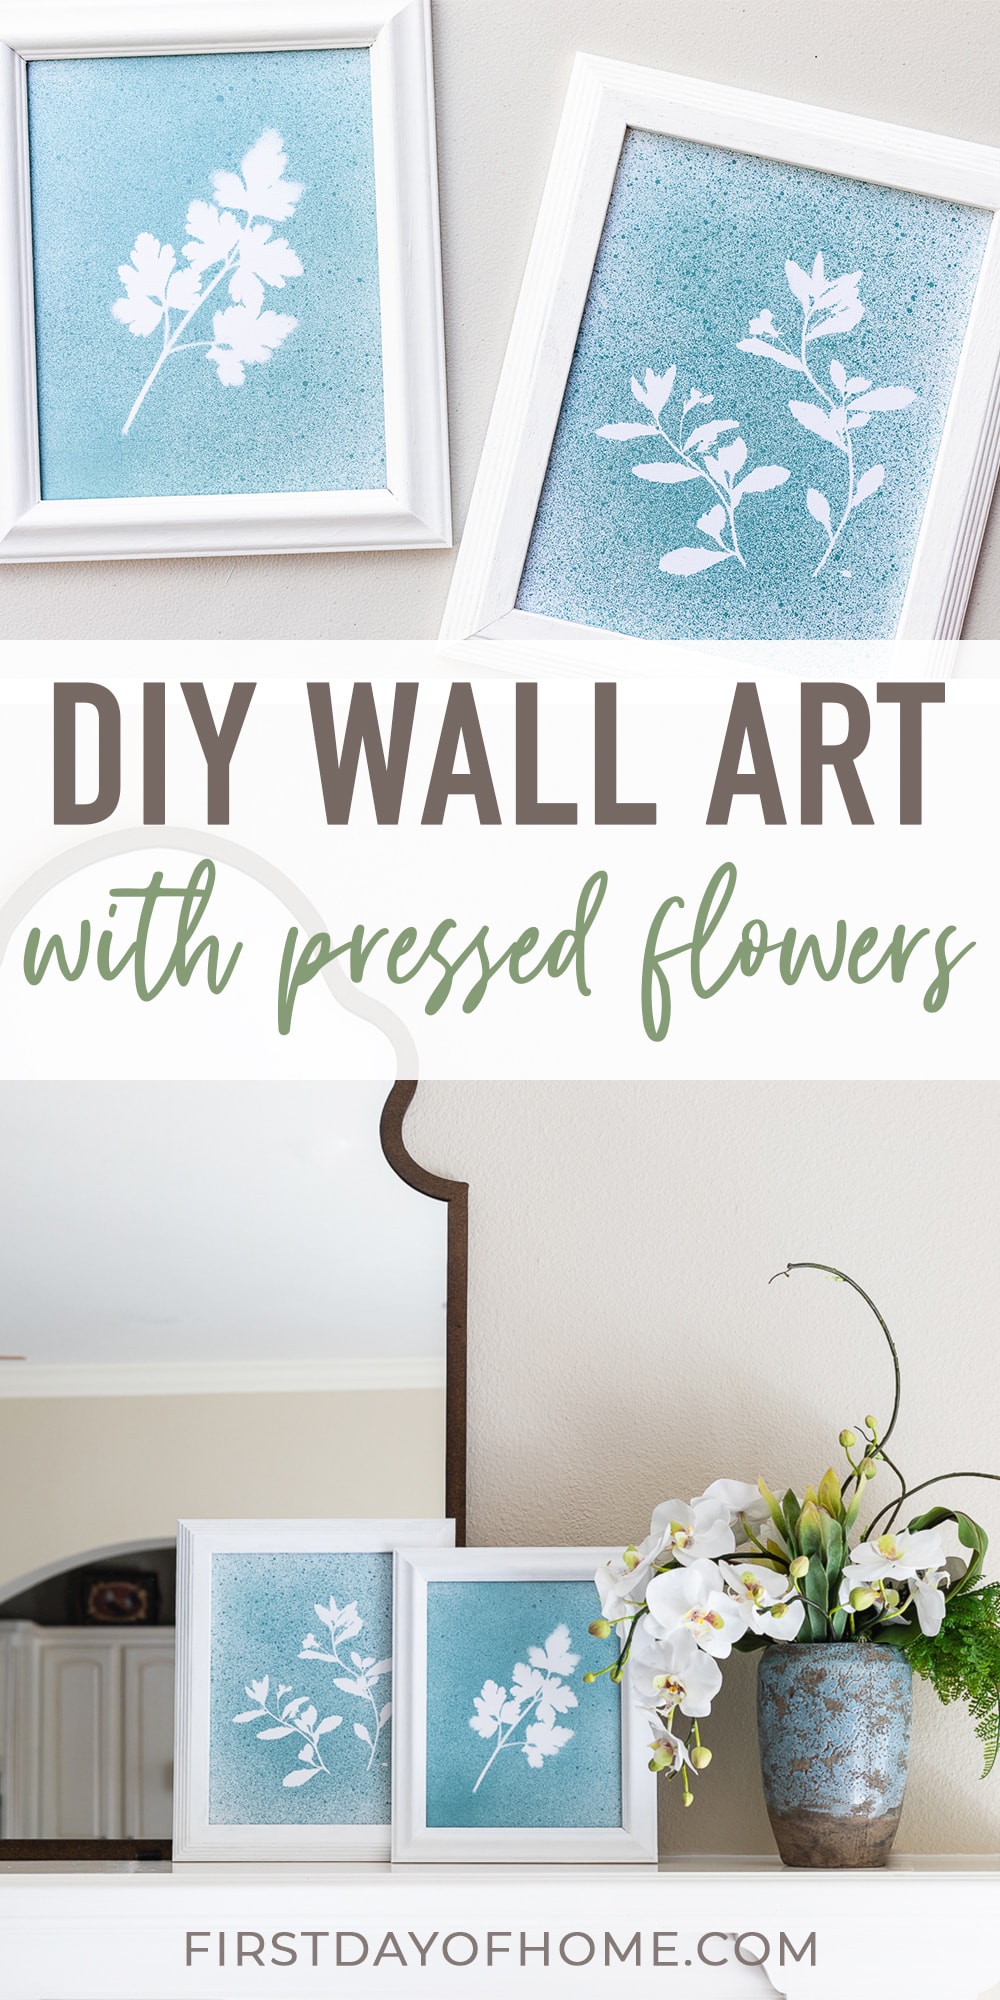 DIY wall art using pressed flowers as silhouettes displayed in frames by themselves and on a fireplace mantel. Text overlay reads "DIY Wall Art with Pressed Flowers"